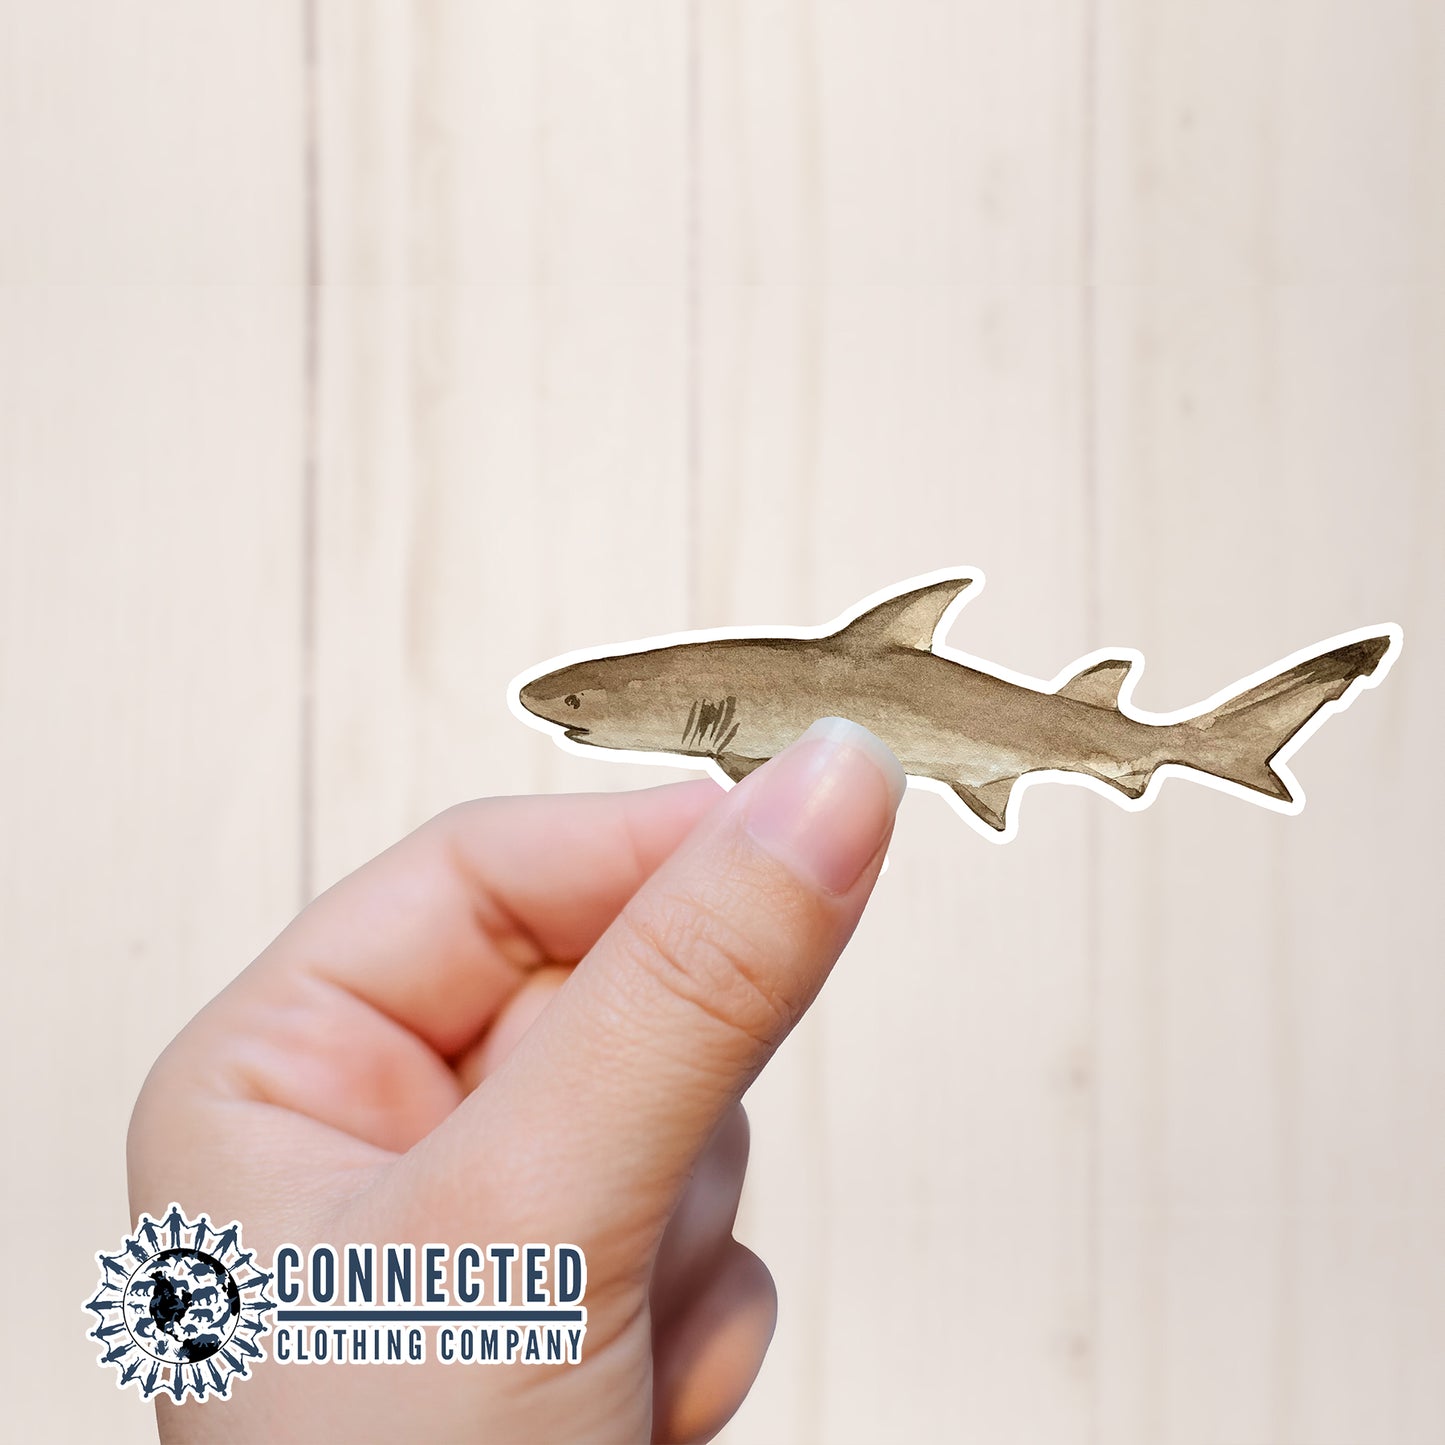 Hand Holding Lemon Shark Watercolor Sticker - Connected Clothing Company - Ethical and Sustainable Apparel - portion of profits donated to shark conservation